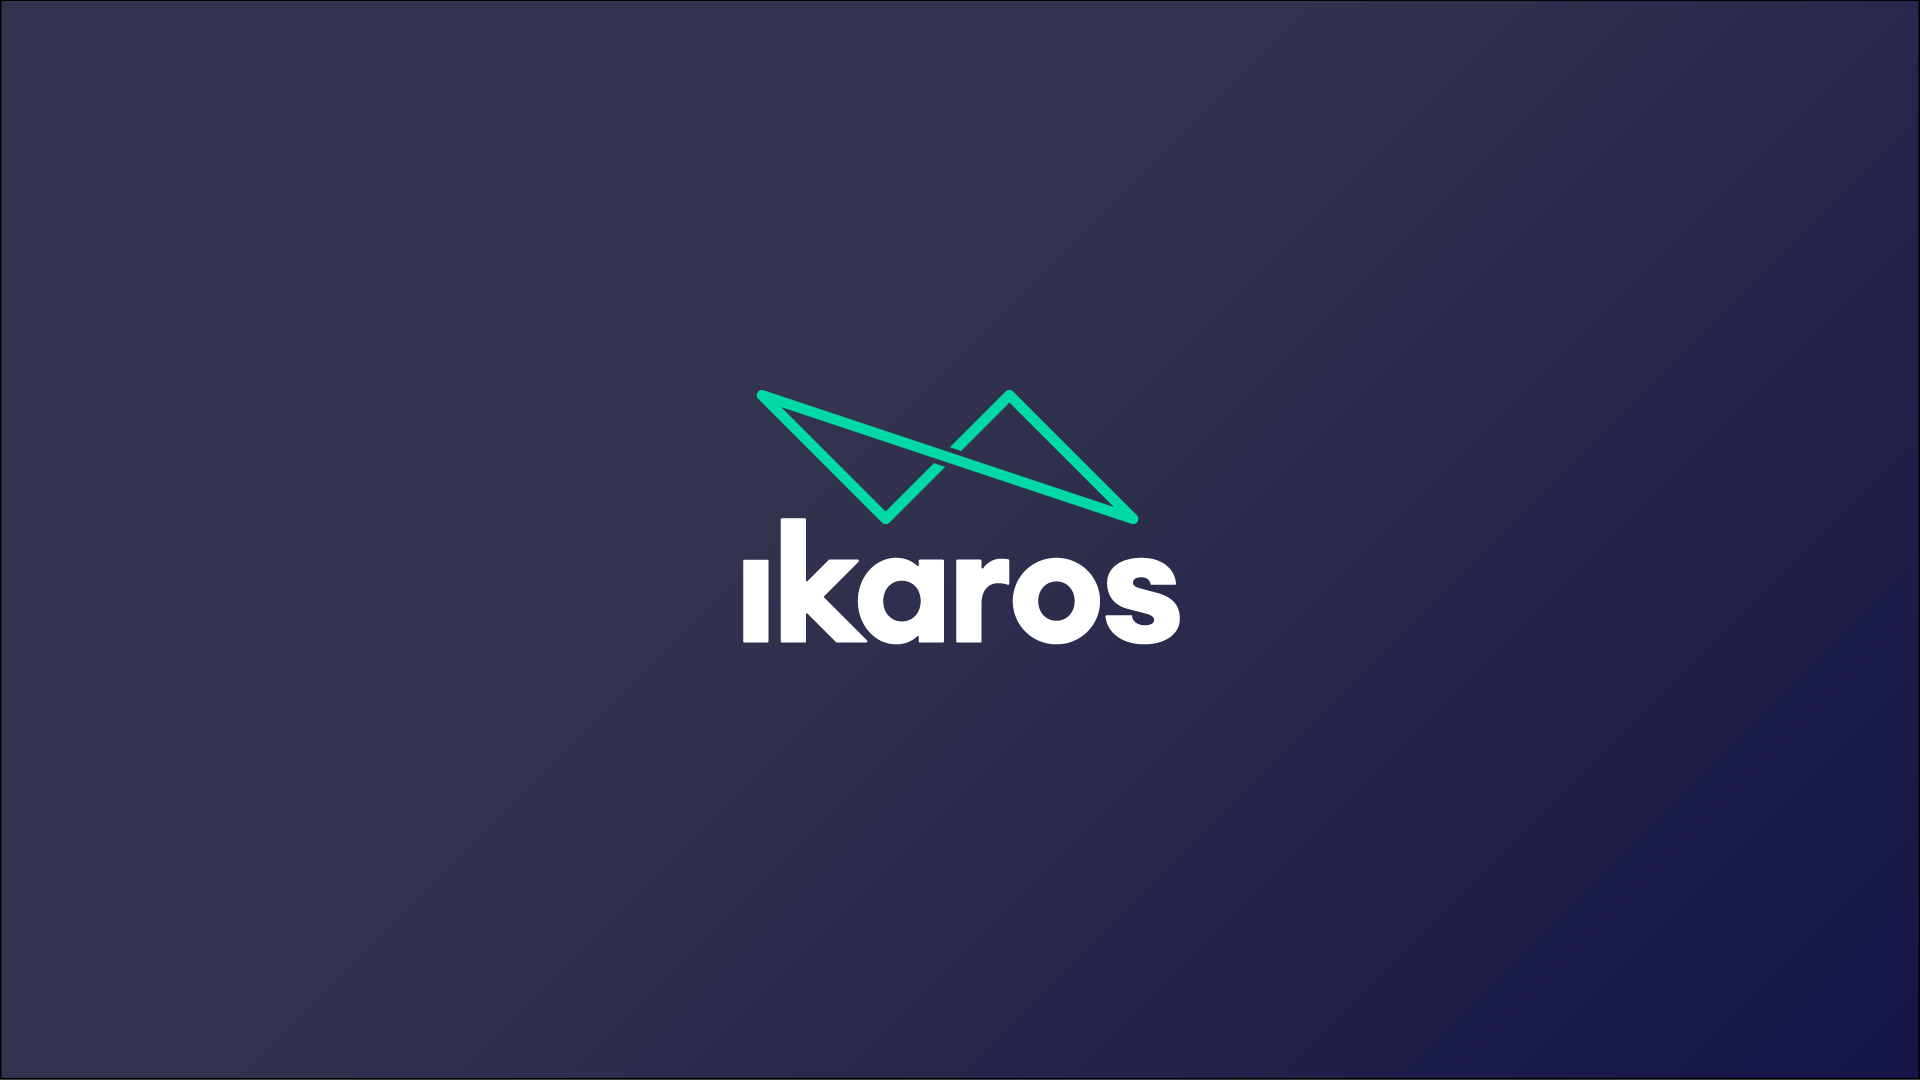 ikaros logo on a blue background. Brand identity and logotype is designed by Helium Design.